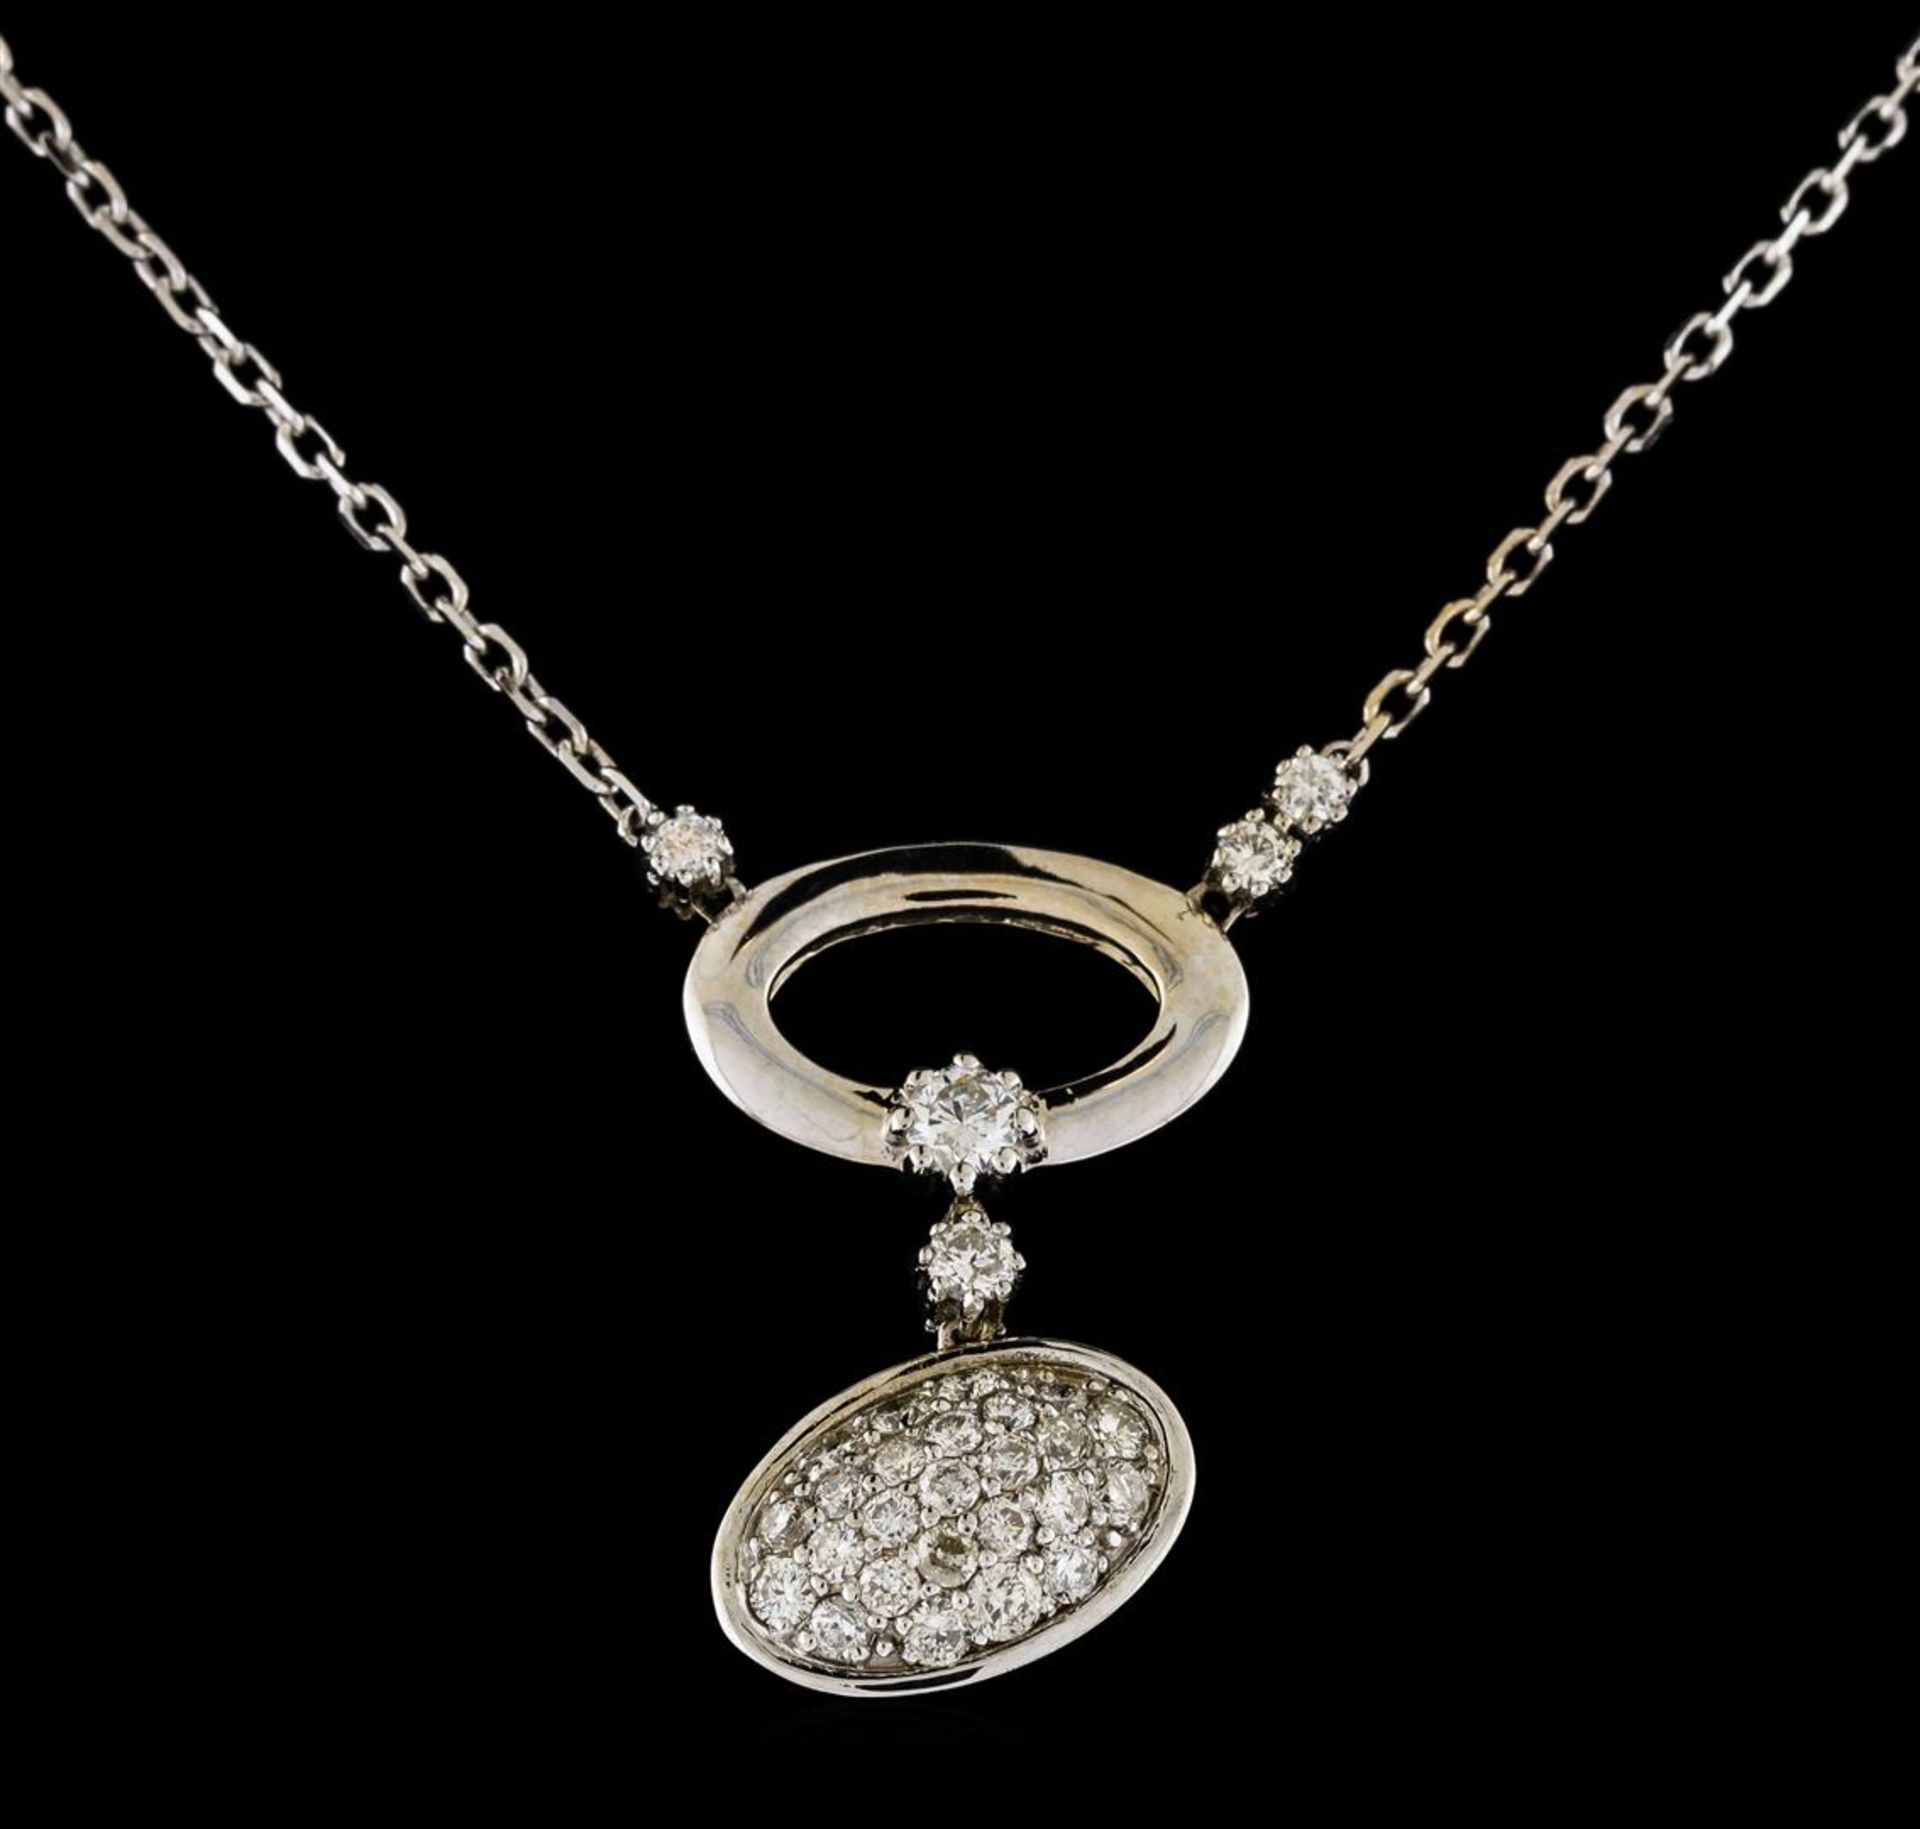 0.68 ctw Diamond Necklace - 14KT White Gold - Image 2 of 2